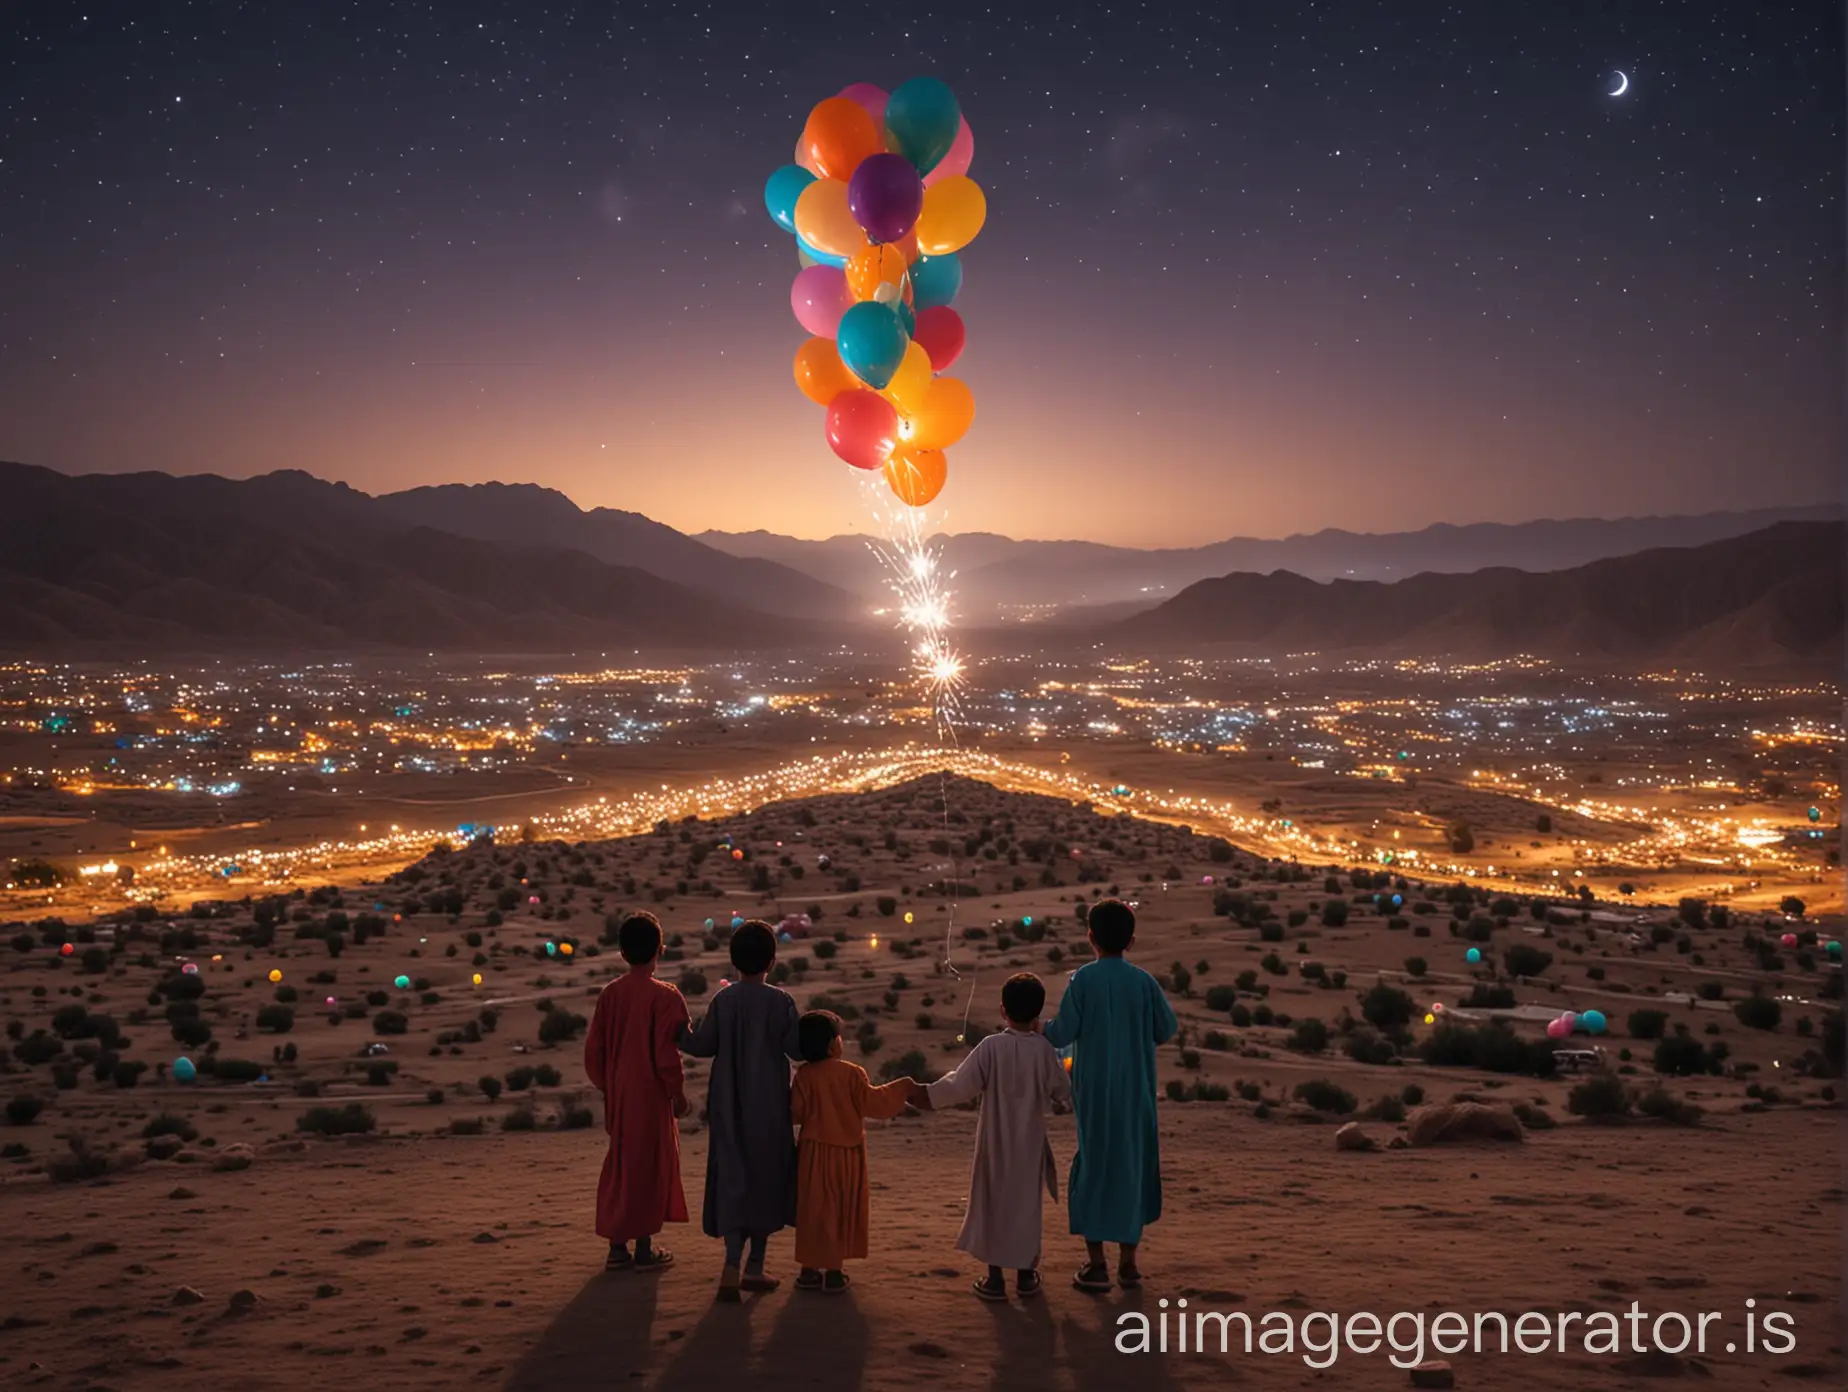 joyful afghan Children Celebrating Eid ul adha with Balloons and Candy at Night long view landscape